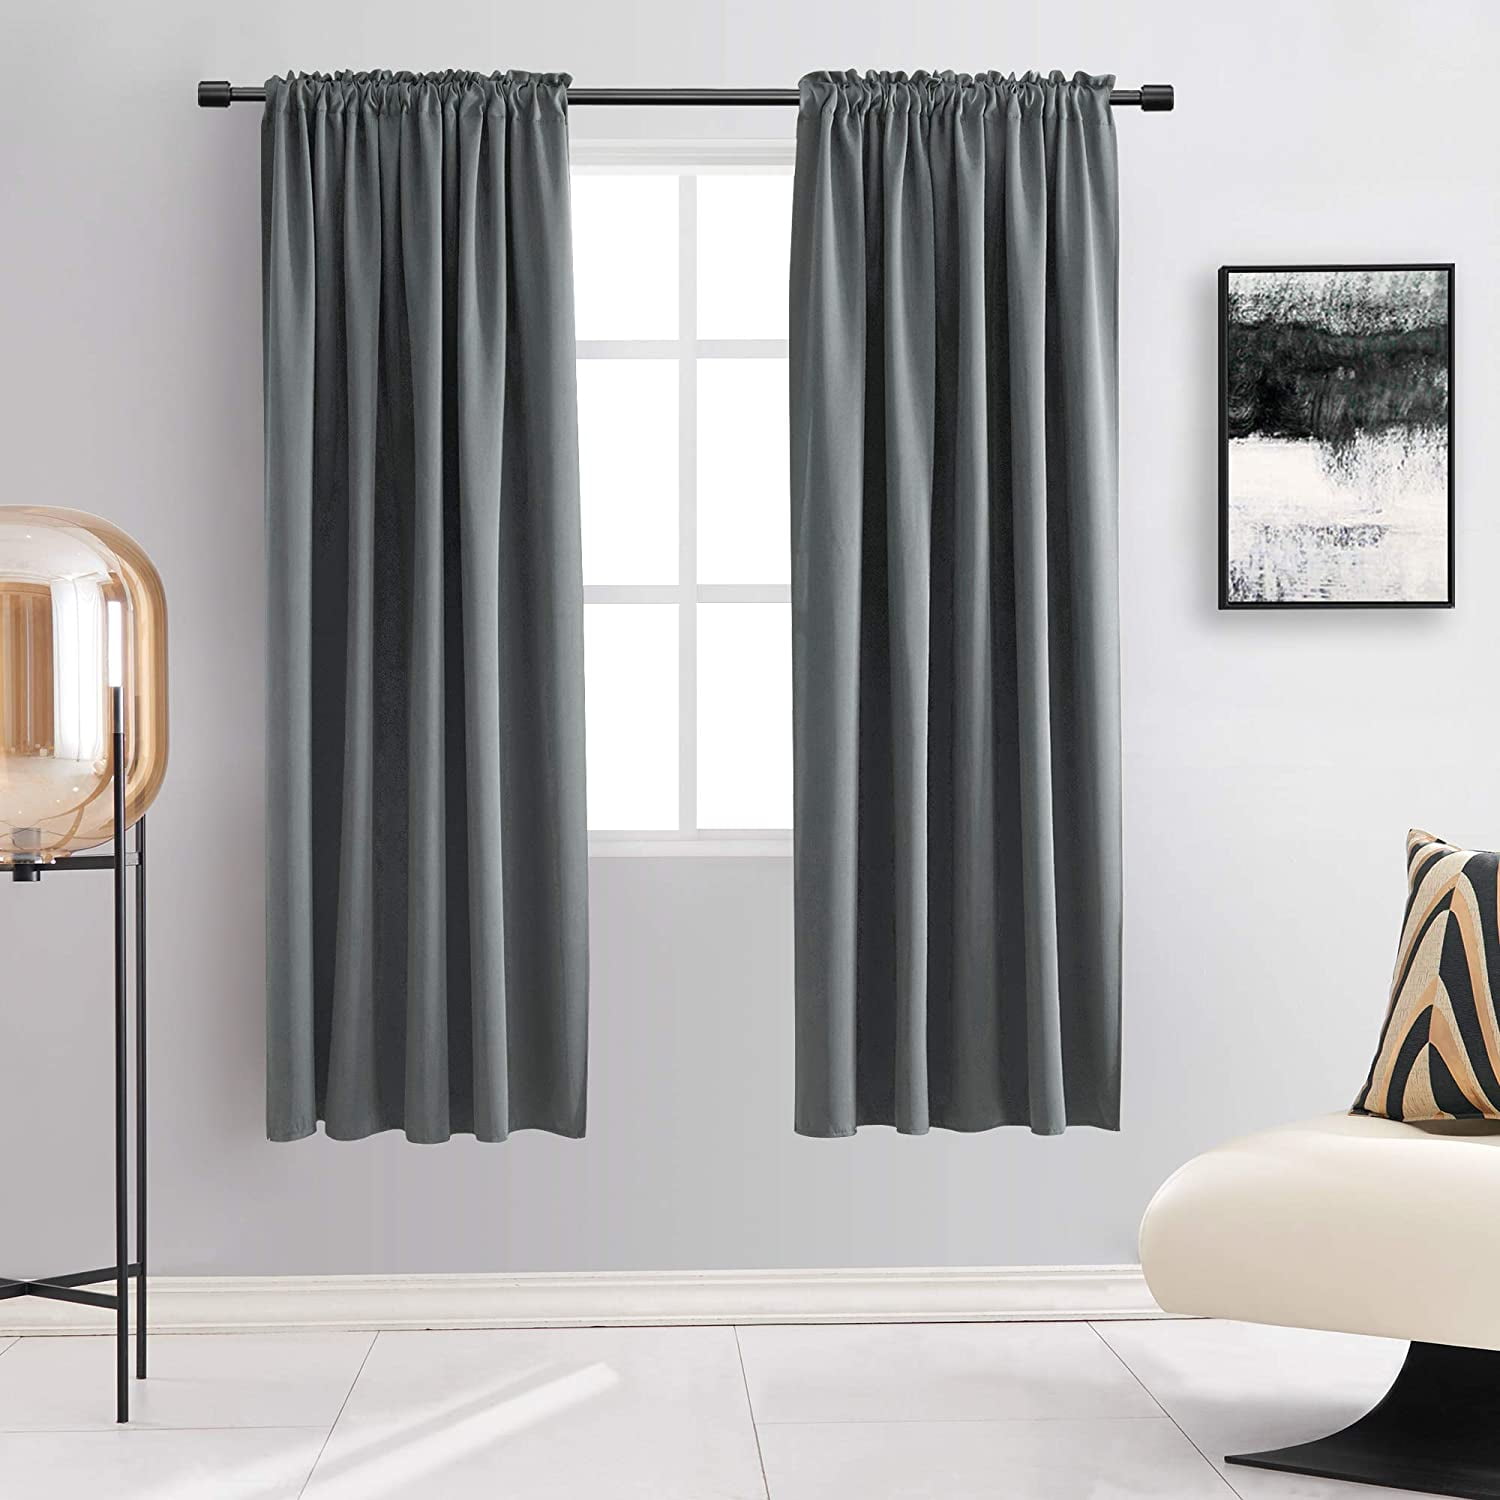 Details about   Iron Man Living Room Blackout Curtains Panels Bedroom Thermal Window Drapes 2PCS 